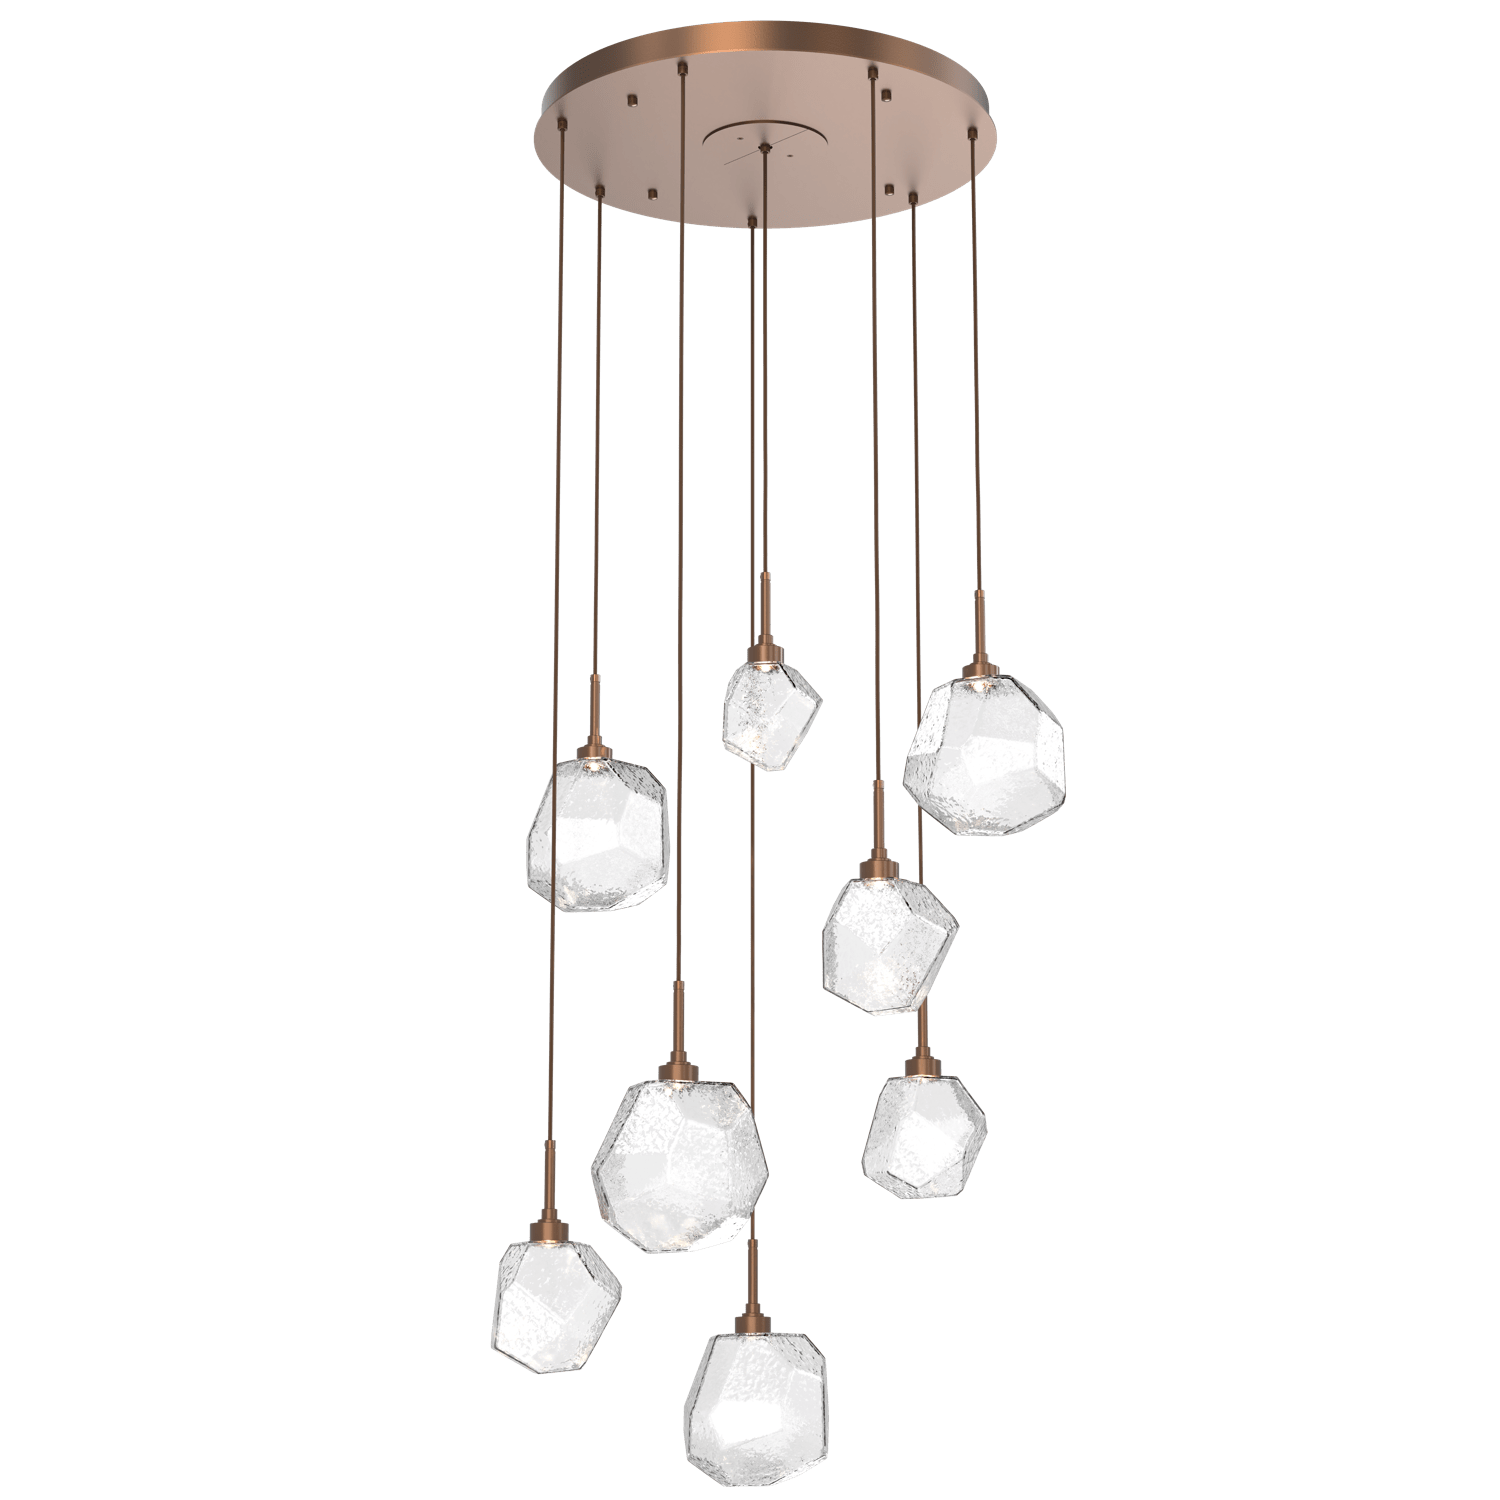 CHB0039-08-BB-C-Hammerton-Studio-Gem-8-light-round-pendant-chandelier-with-burnished-bronze-finish-and-clear-blown-glass-shades-and-LED-lamping